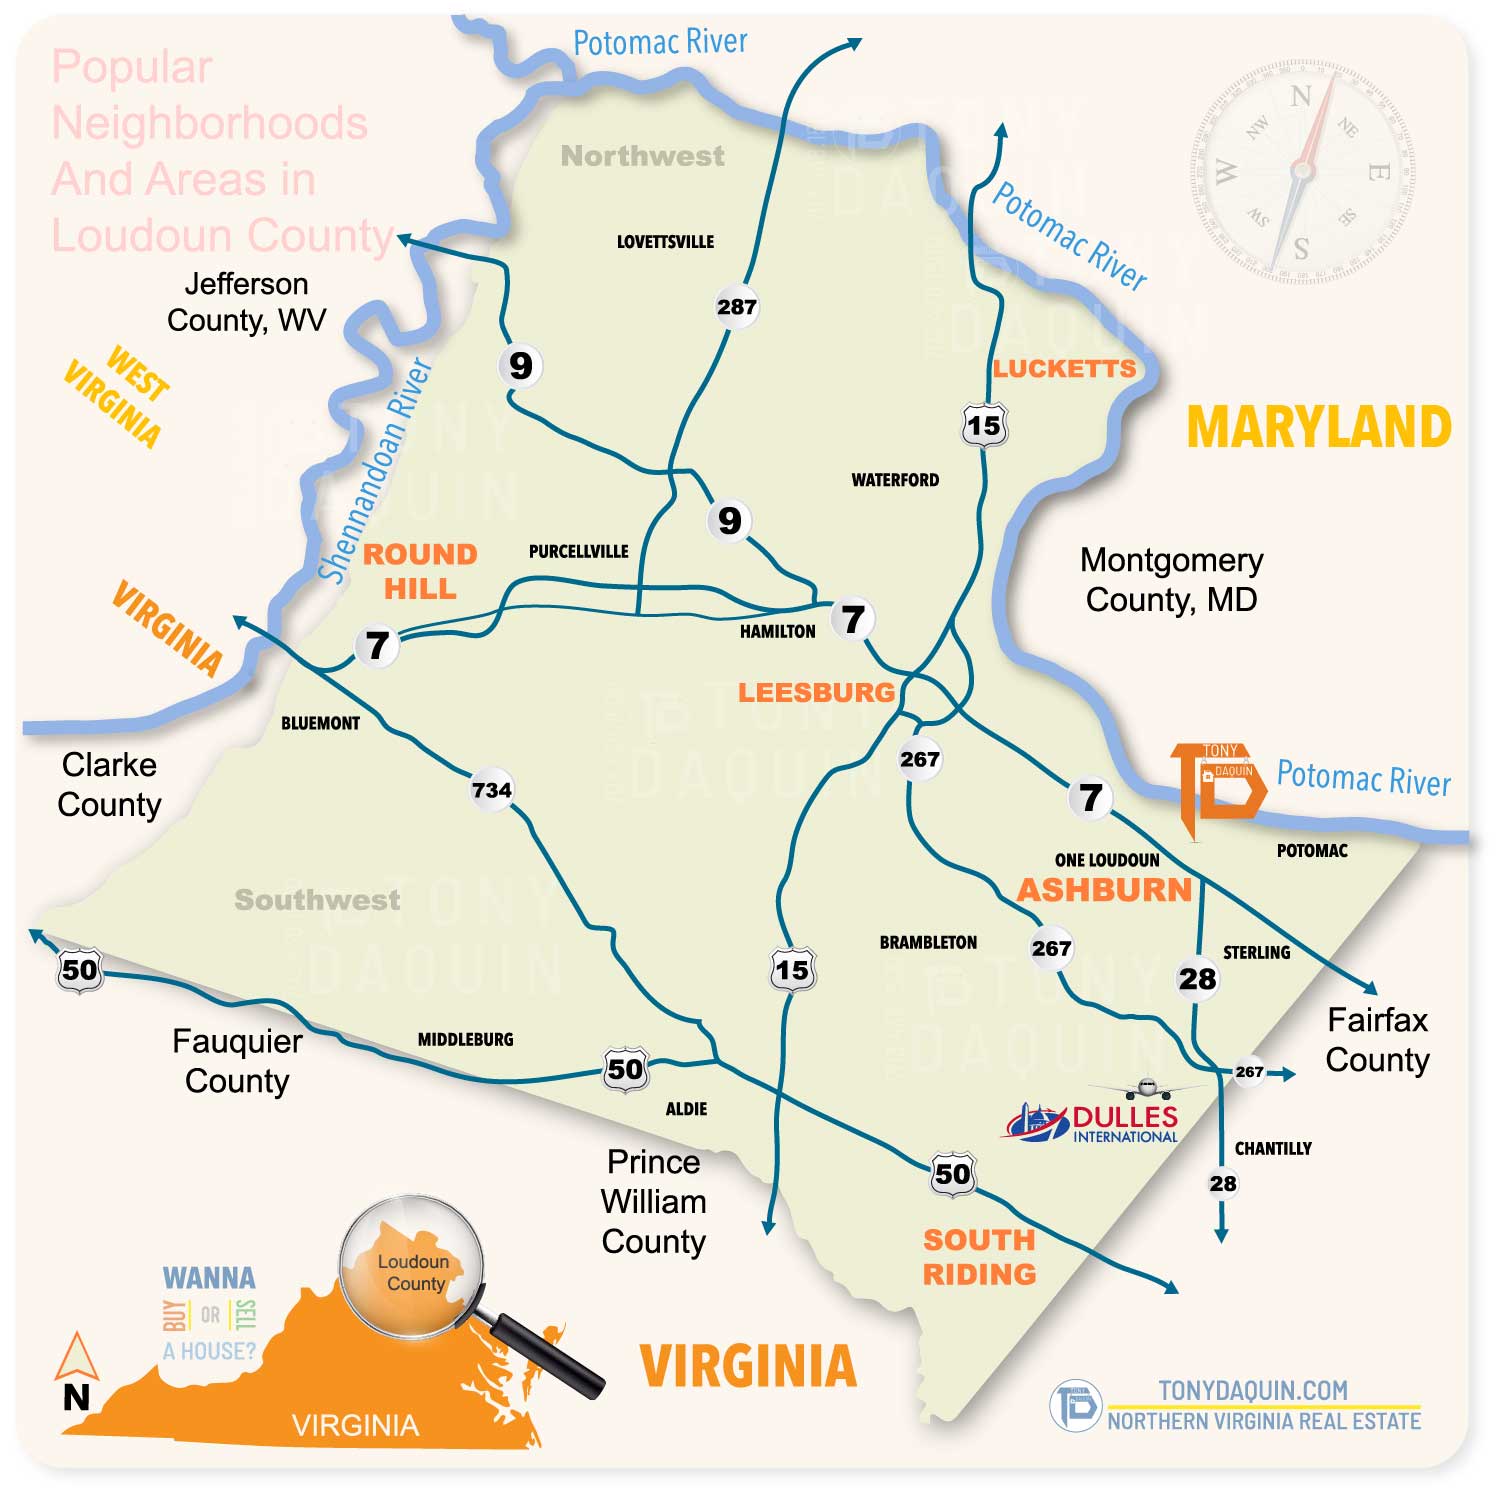 Homebuyer. Map of Loudoun County VA with the Washington & Old Dominion Trail (W&OD). 72 miles of trails through the Northern Virginia Counties